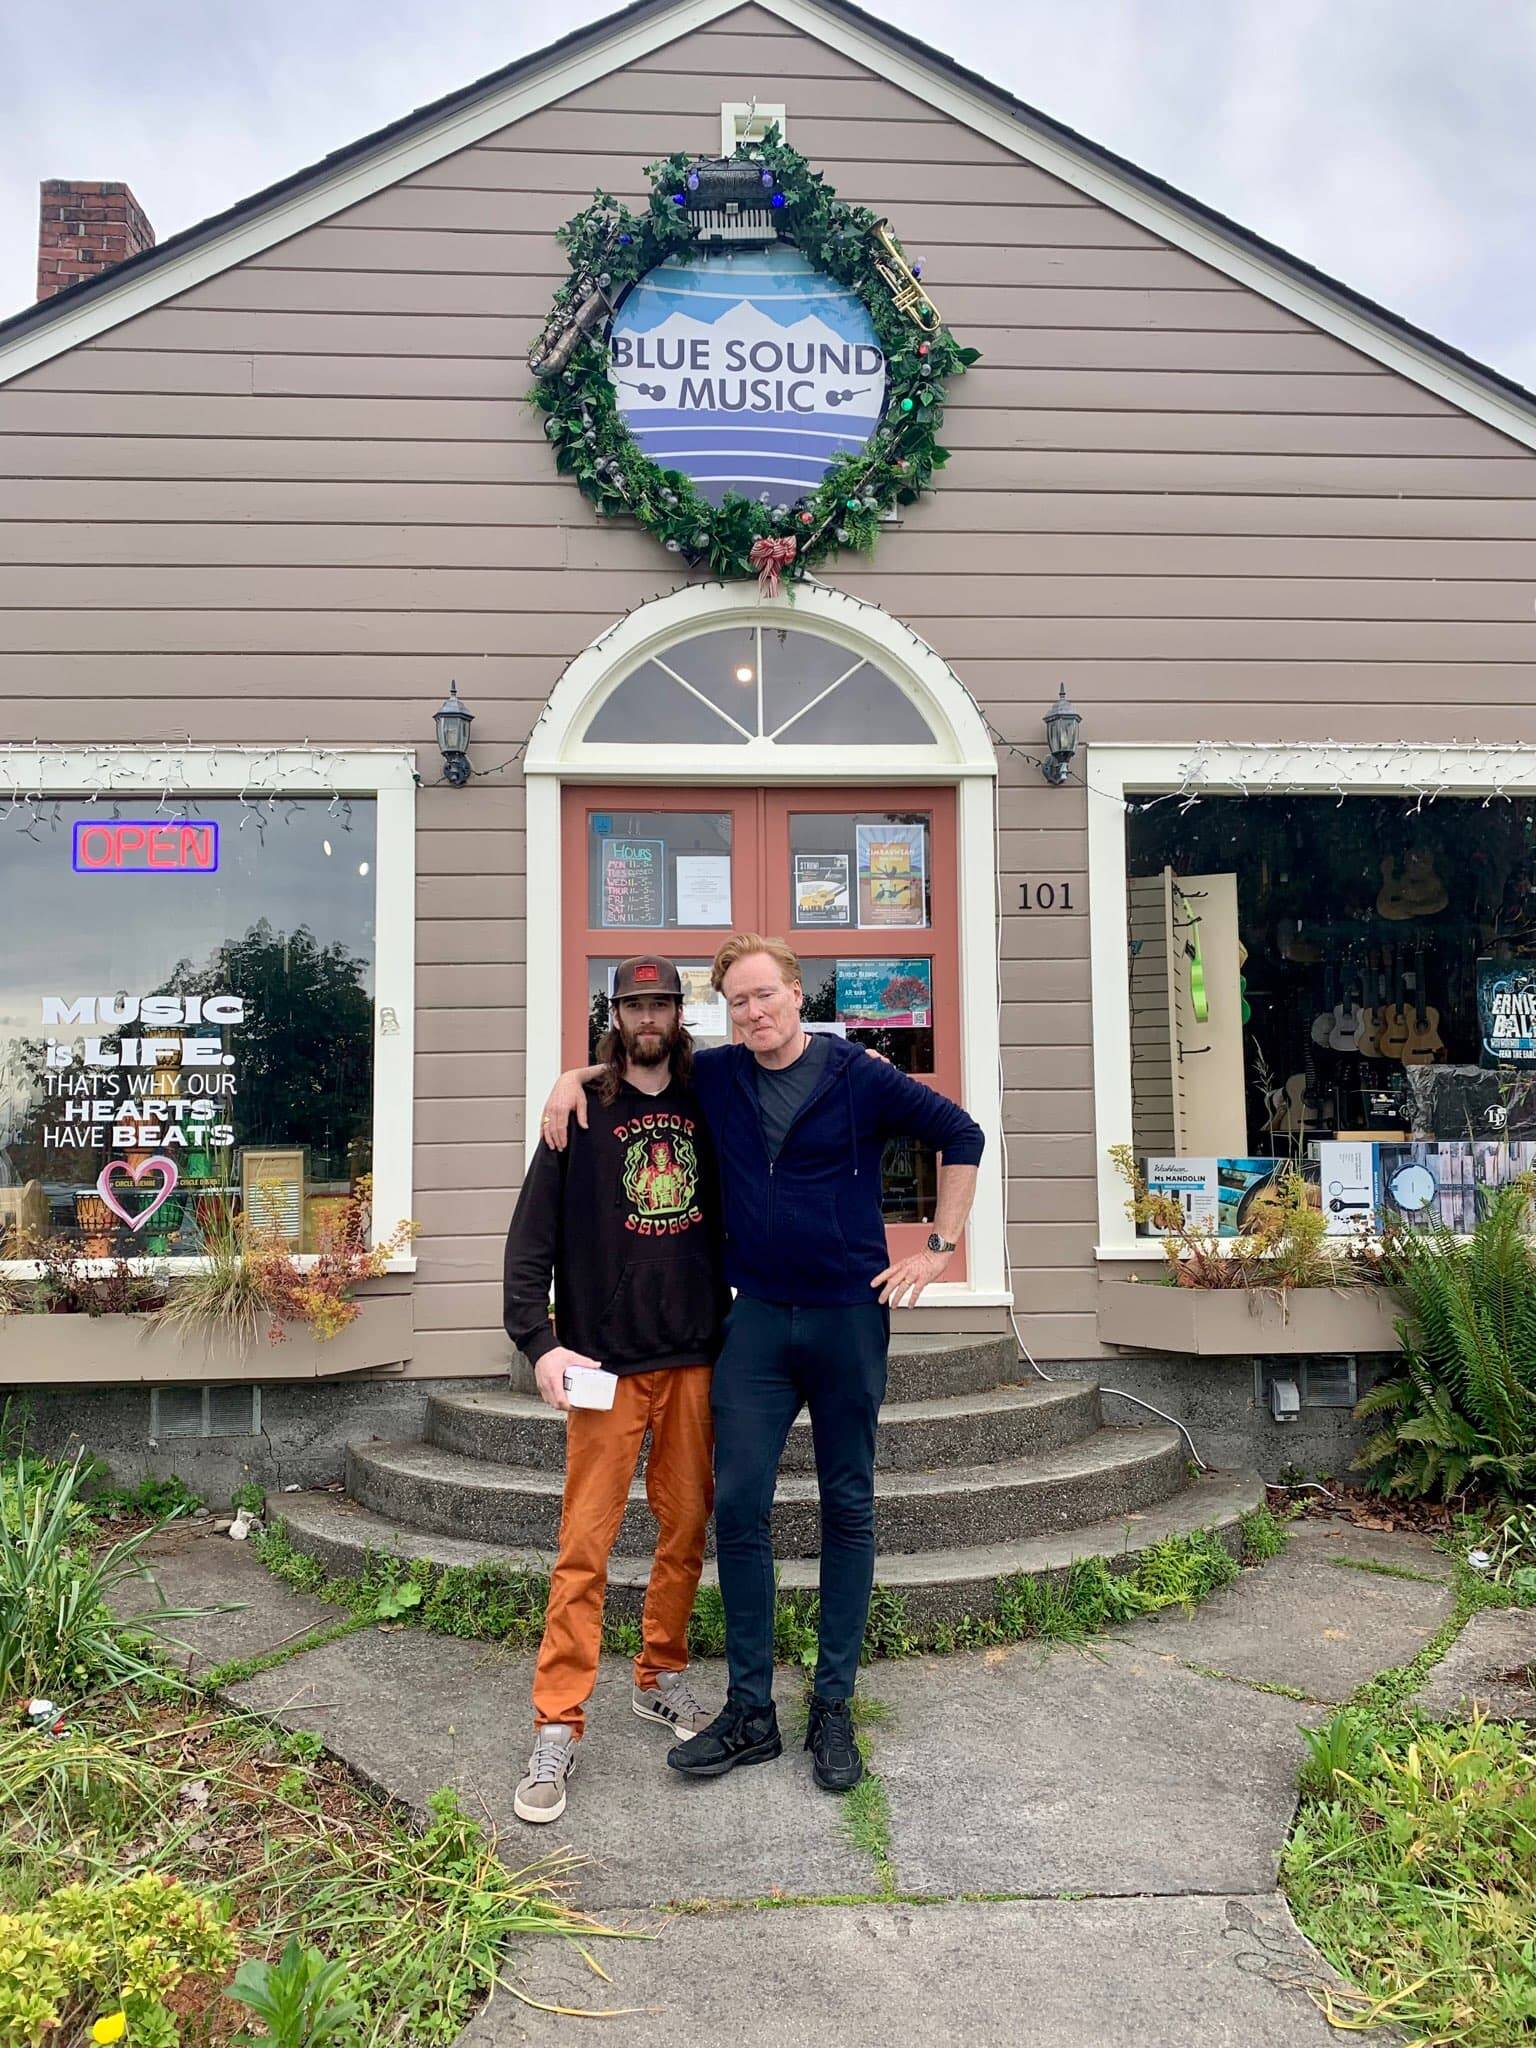 Photo provided
Keegan Harshman, owner of Blue Sound Music, had a brief but pleasant conversation with Conan O’Brien about playing the guitar.